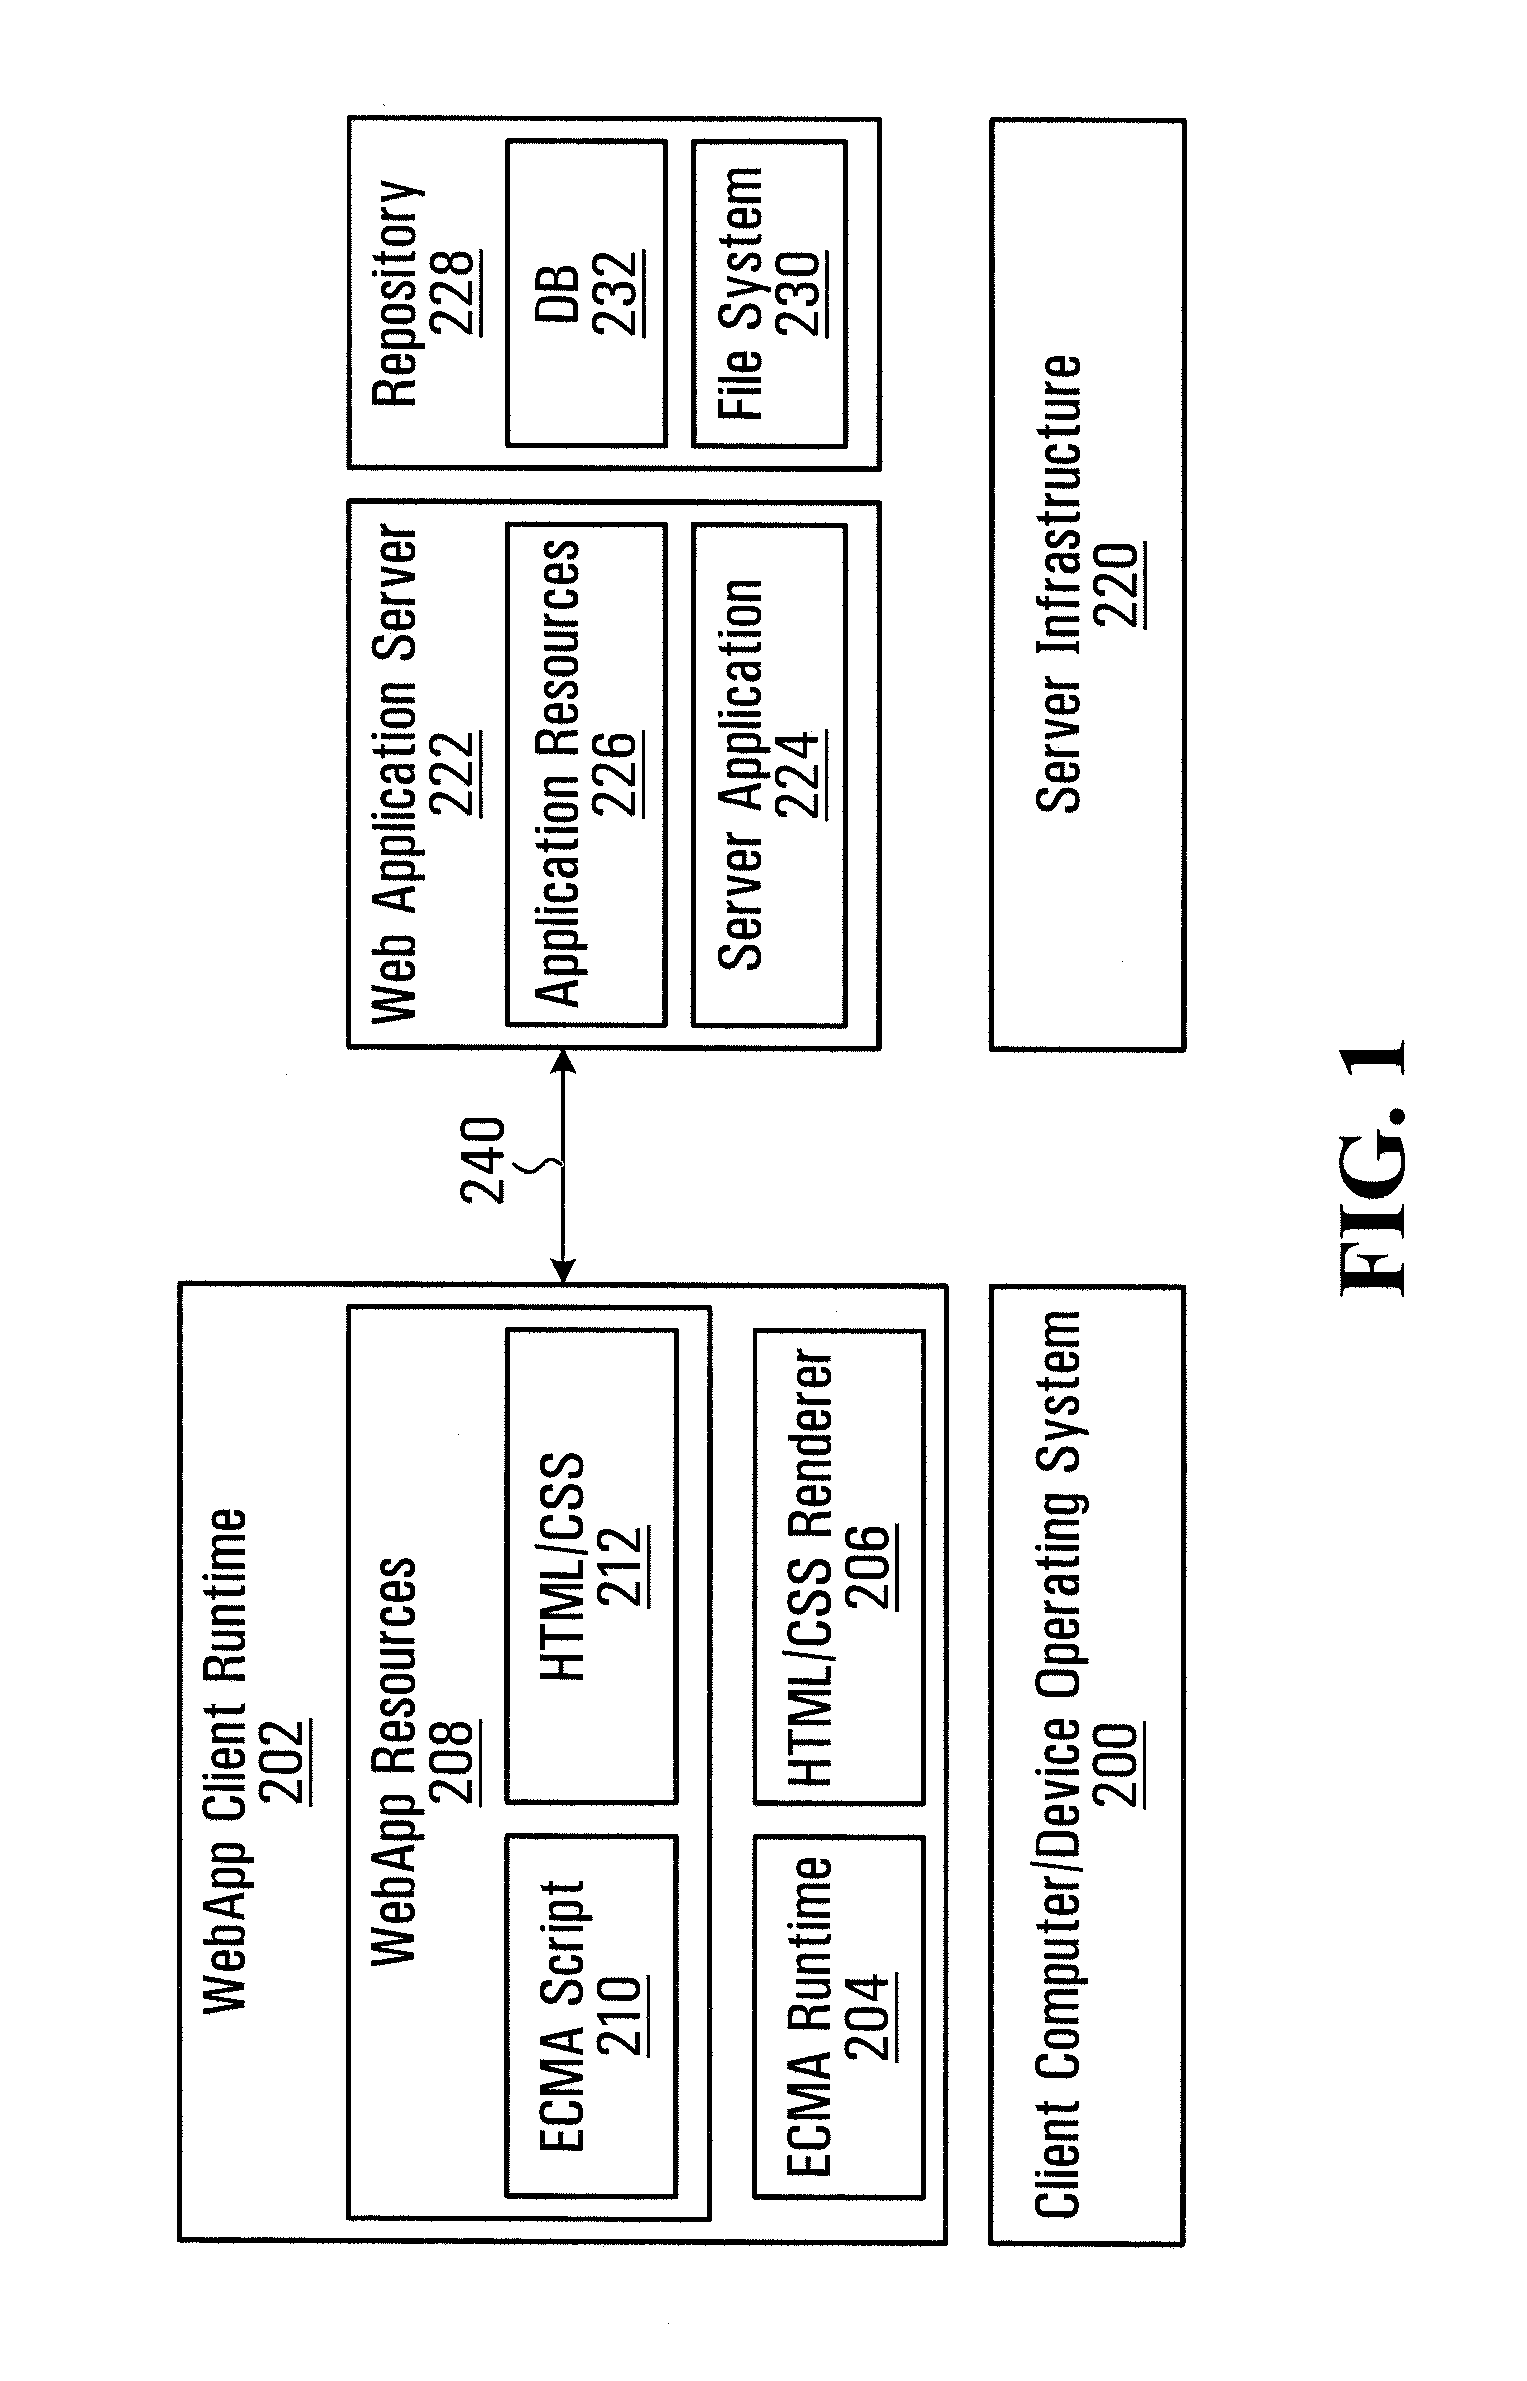 Systems and methods for intercepting, processing, and protecting user data through web application pattern detection